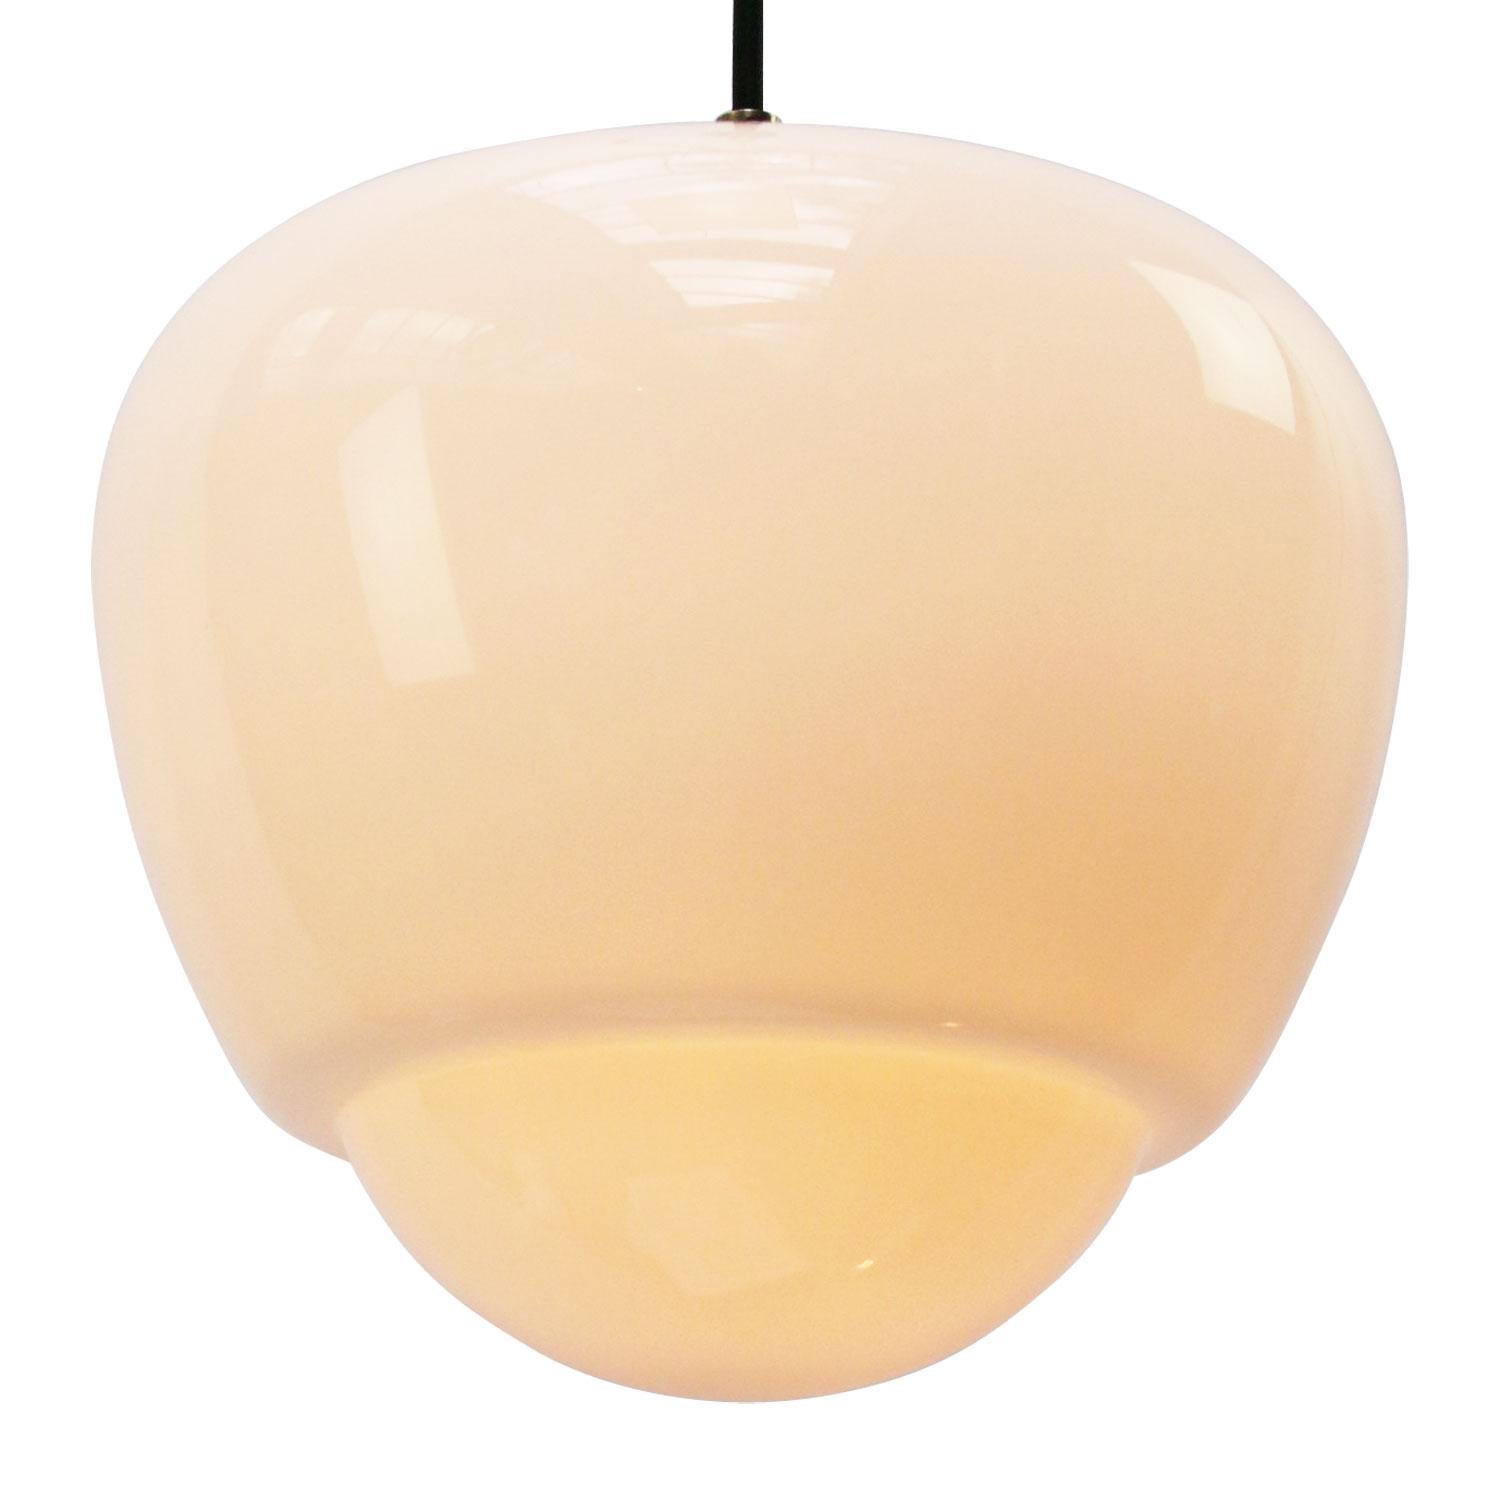 Opaline glass pendant.
2 meter black wire

Weight: 2.00 kg / 4.4 lb

Priced per individual item. All lamps have been made suitable by international standards for incandescent light bulbs, energy-efficient and LED bulbs. E26/E27 bulb holders and new